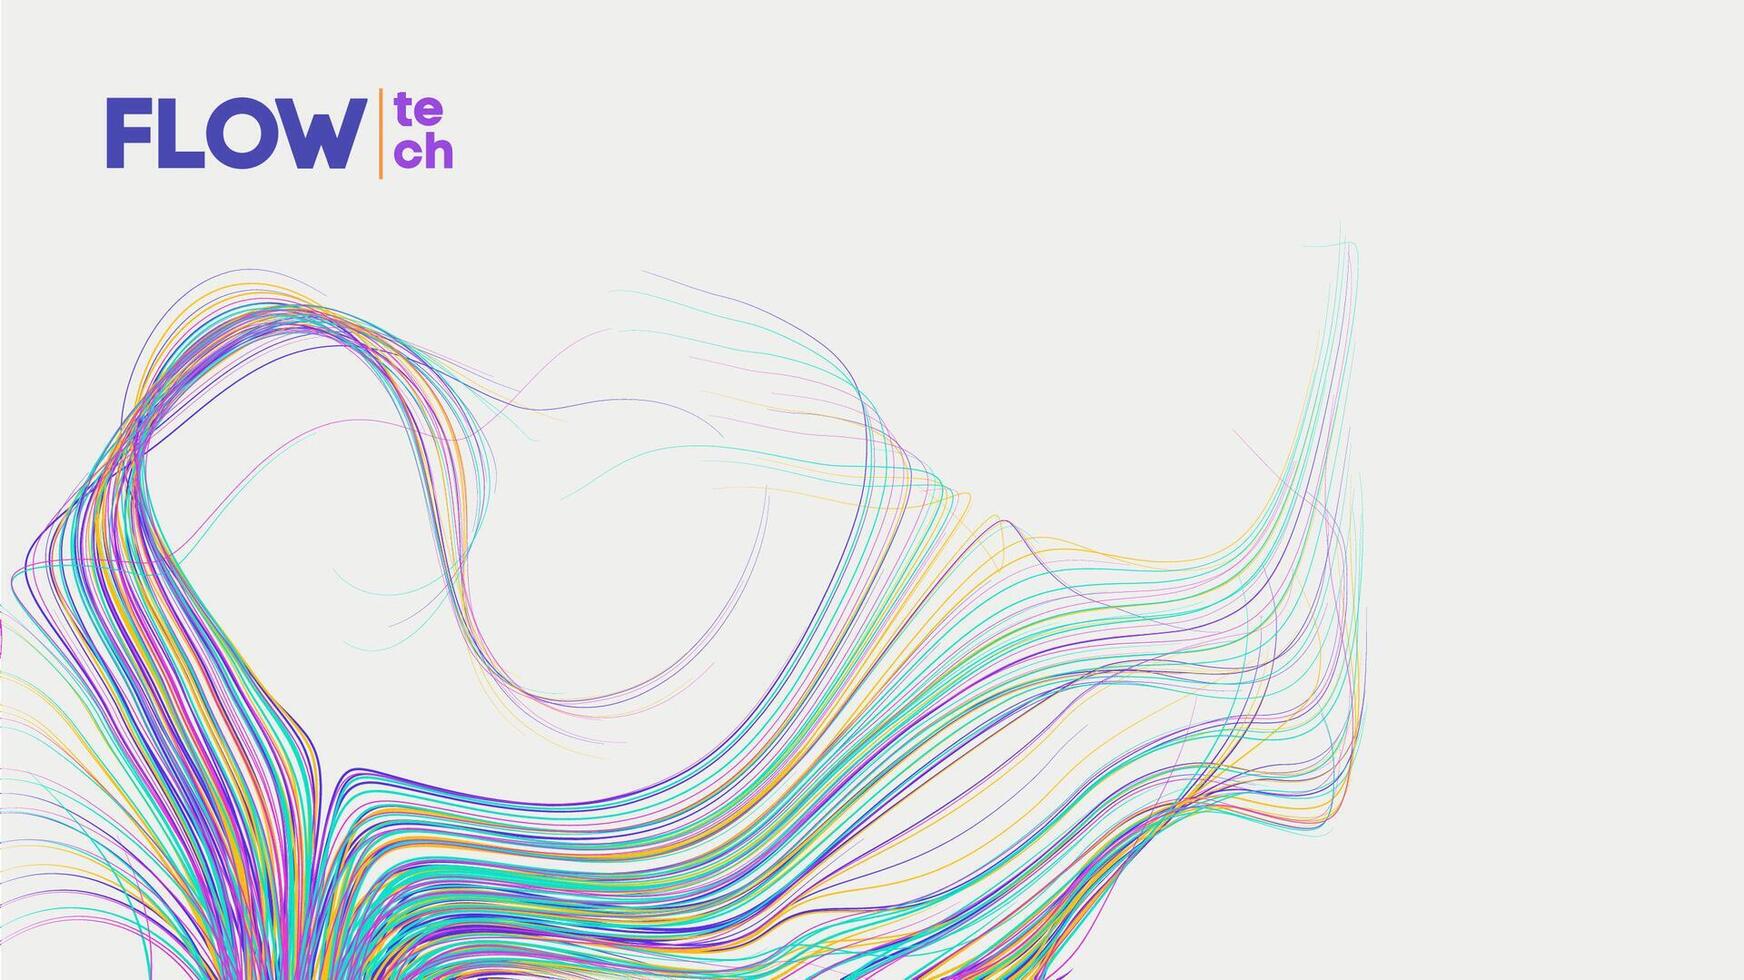 Flow Tech Multicolored Abstract Line Art on White Background vector